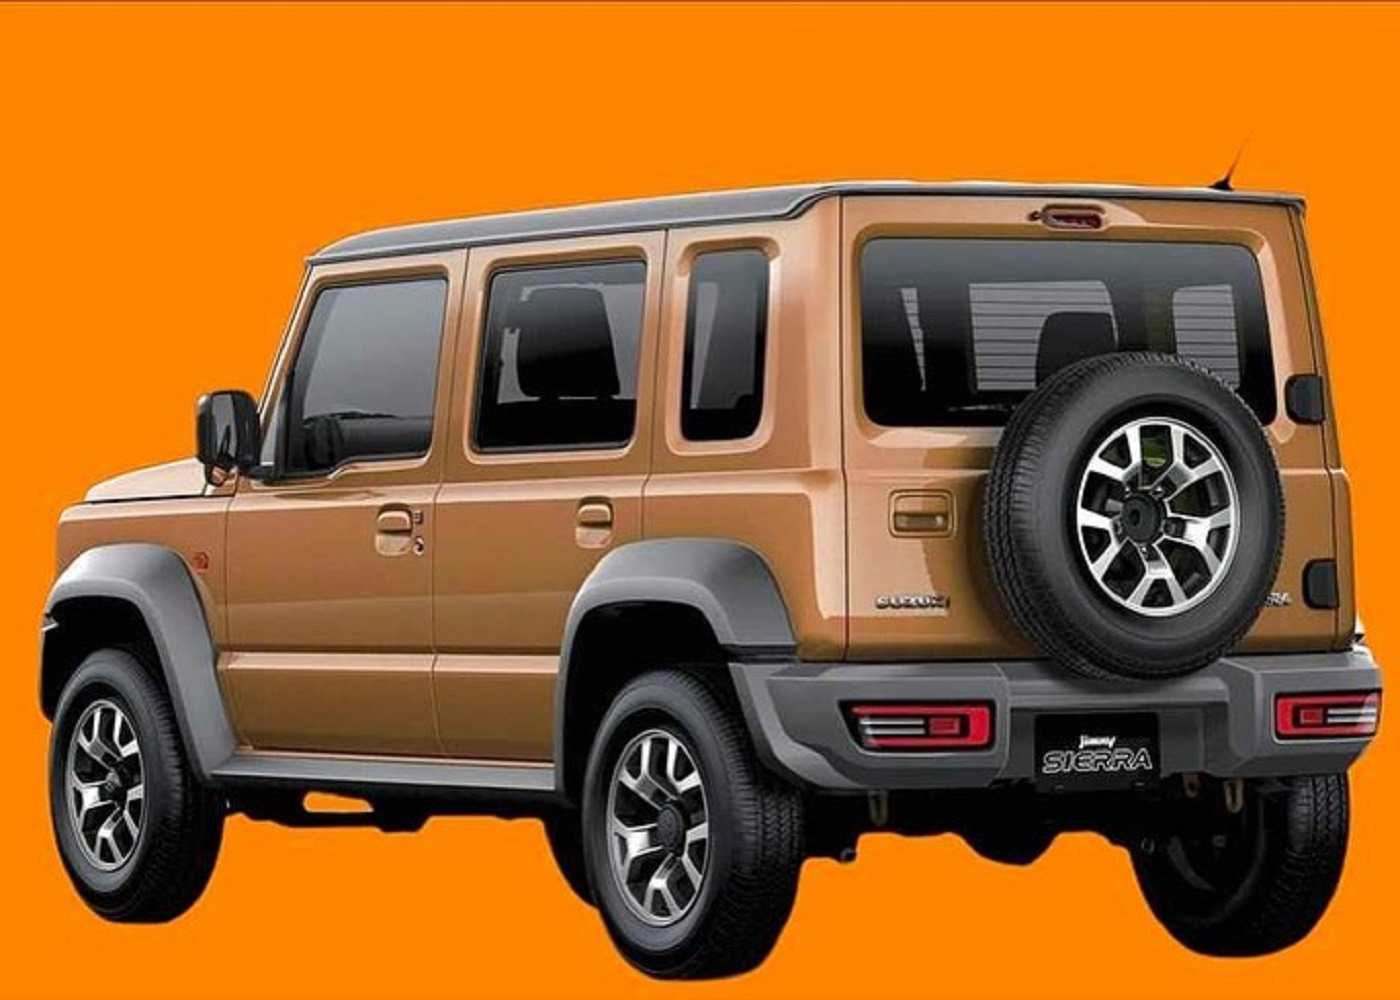 5-Door Suzuki Jimny Launch Likely In 2023 - What We Know So Far!